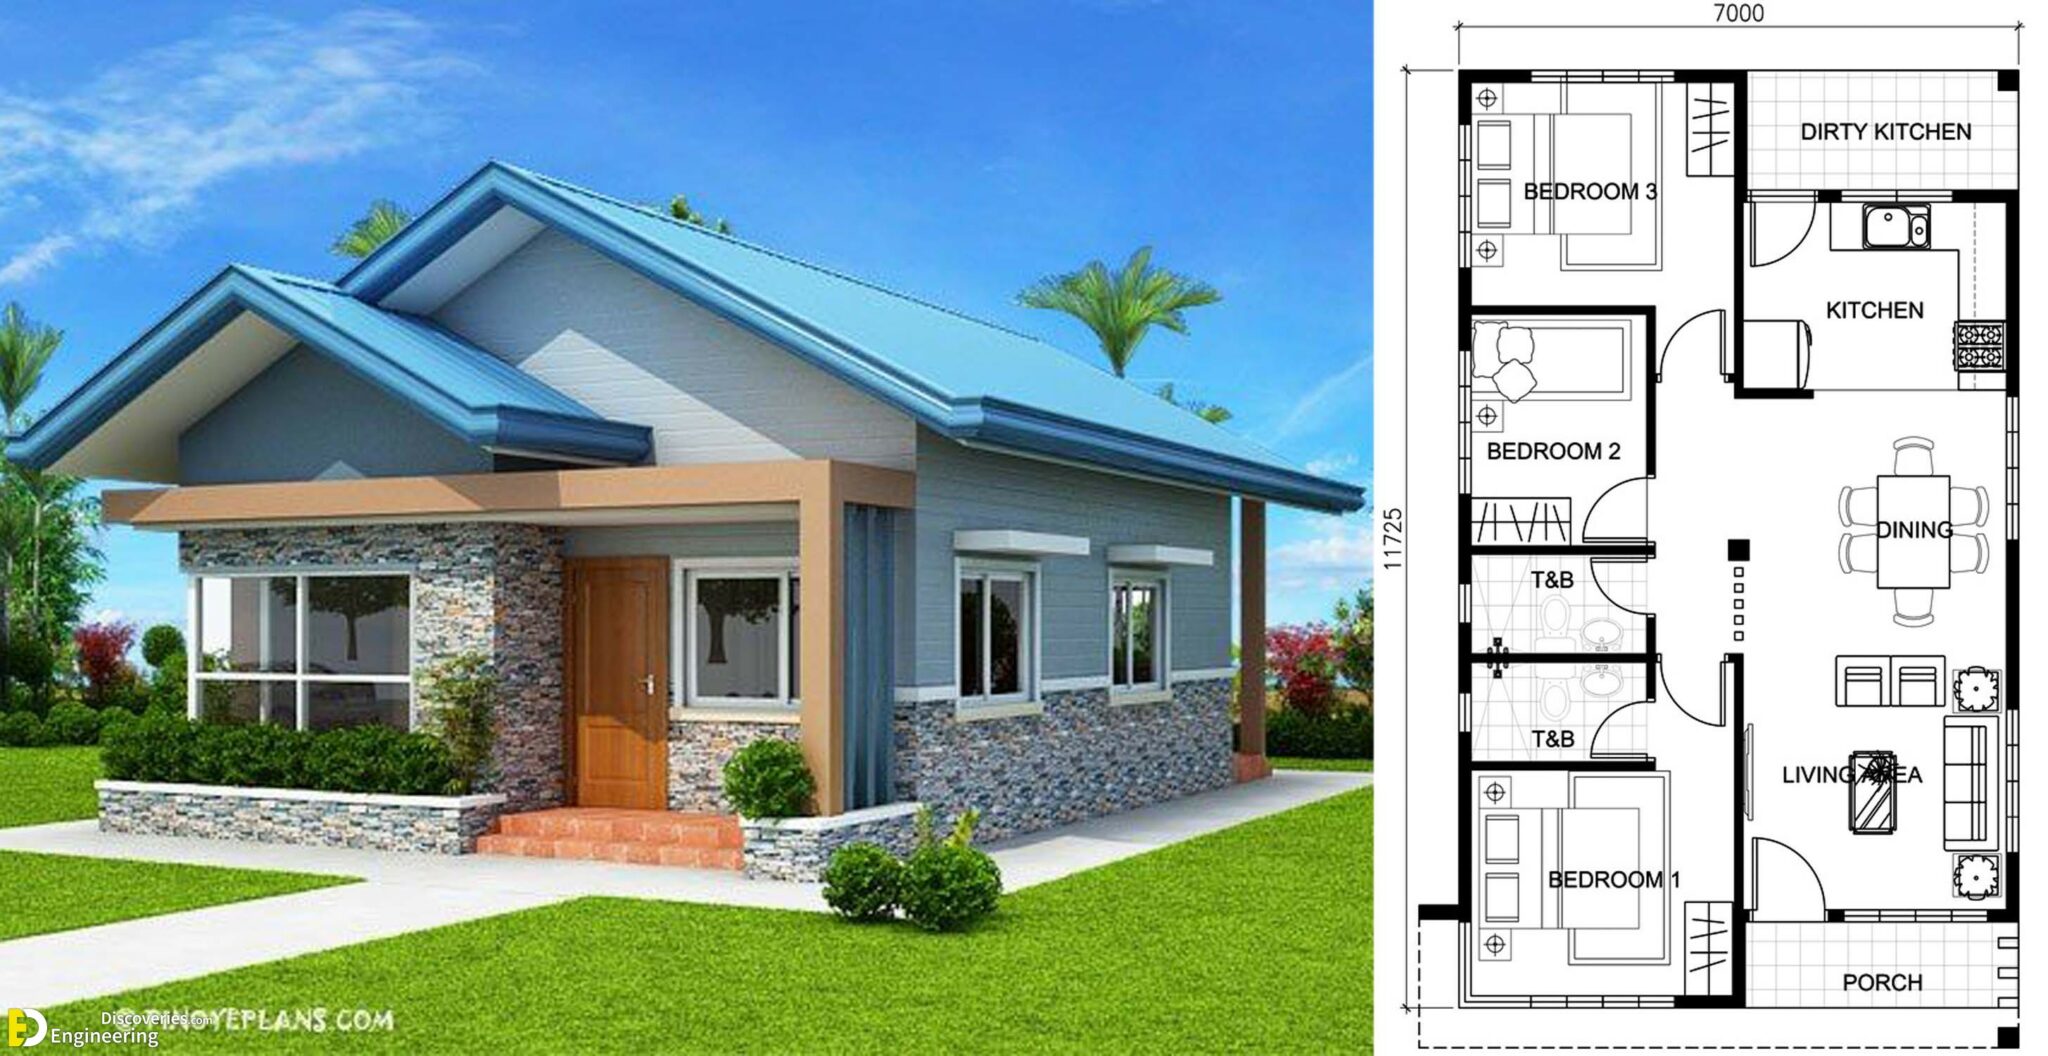 Three Bedroom Bungalow House Plans - Engineering Discoveries